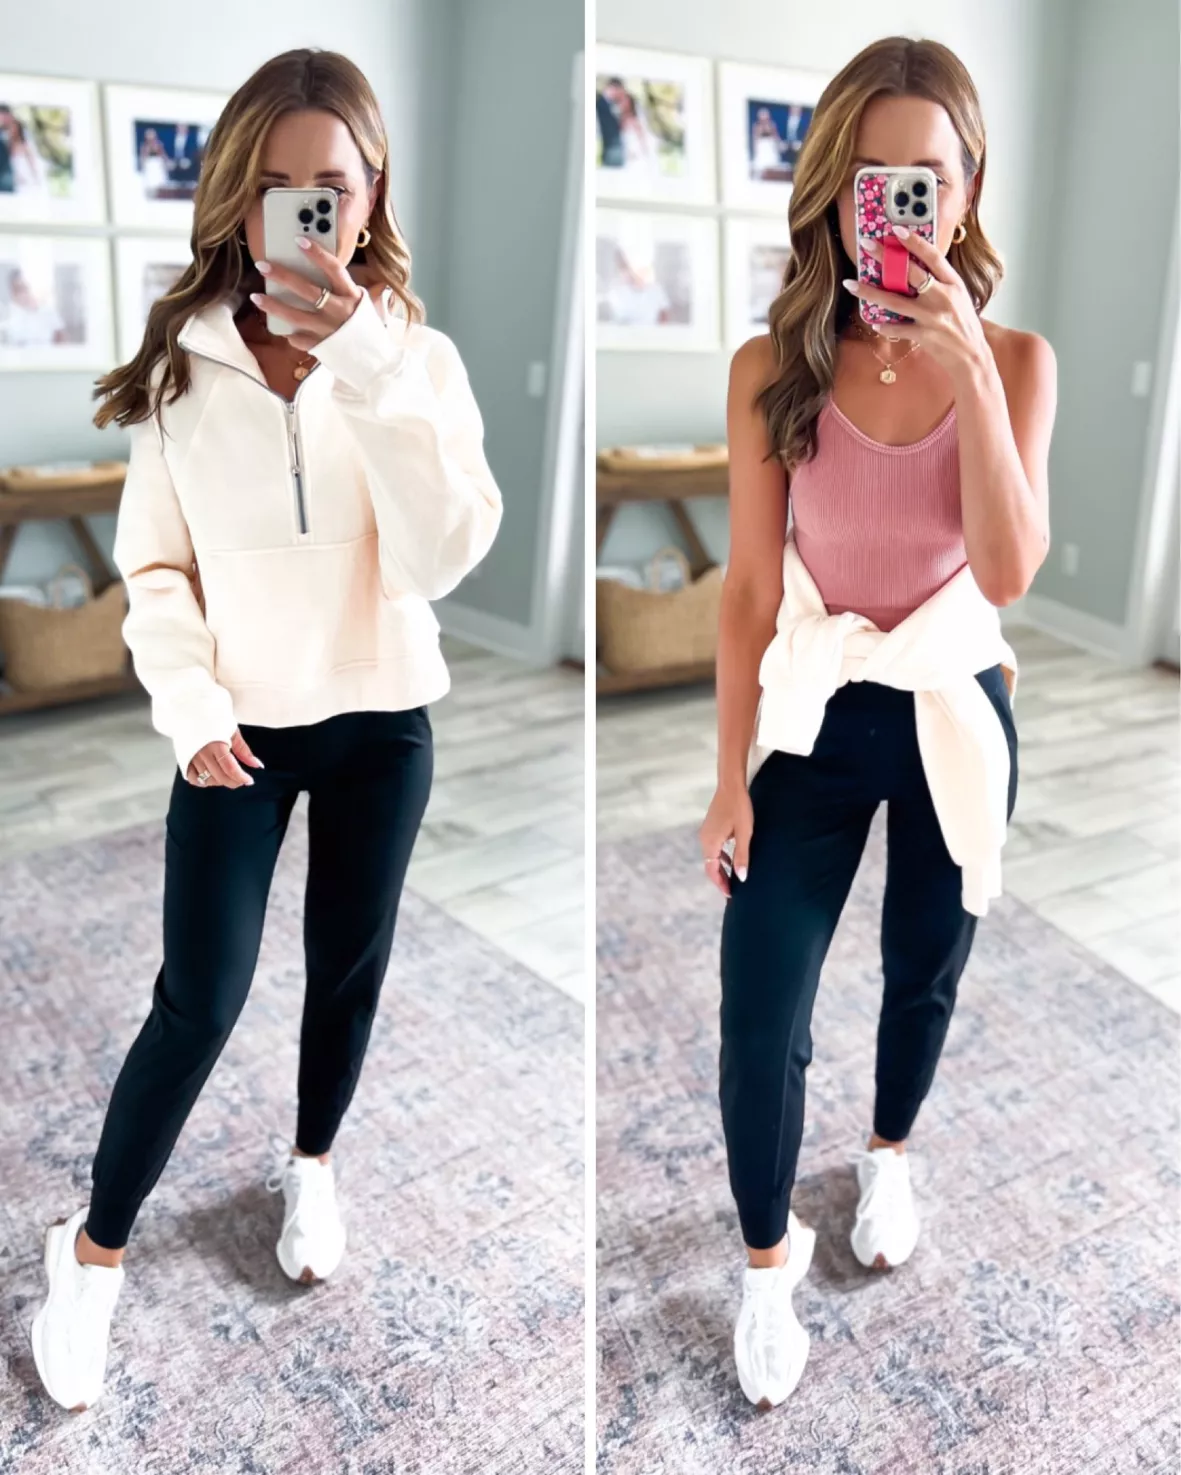 How To Style Yoga Pants in Four Ways for Outfit Ideas